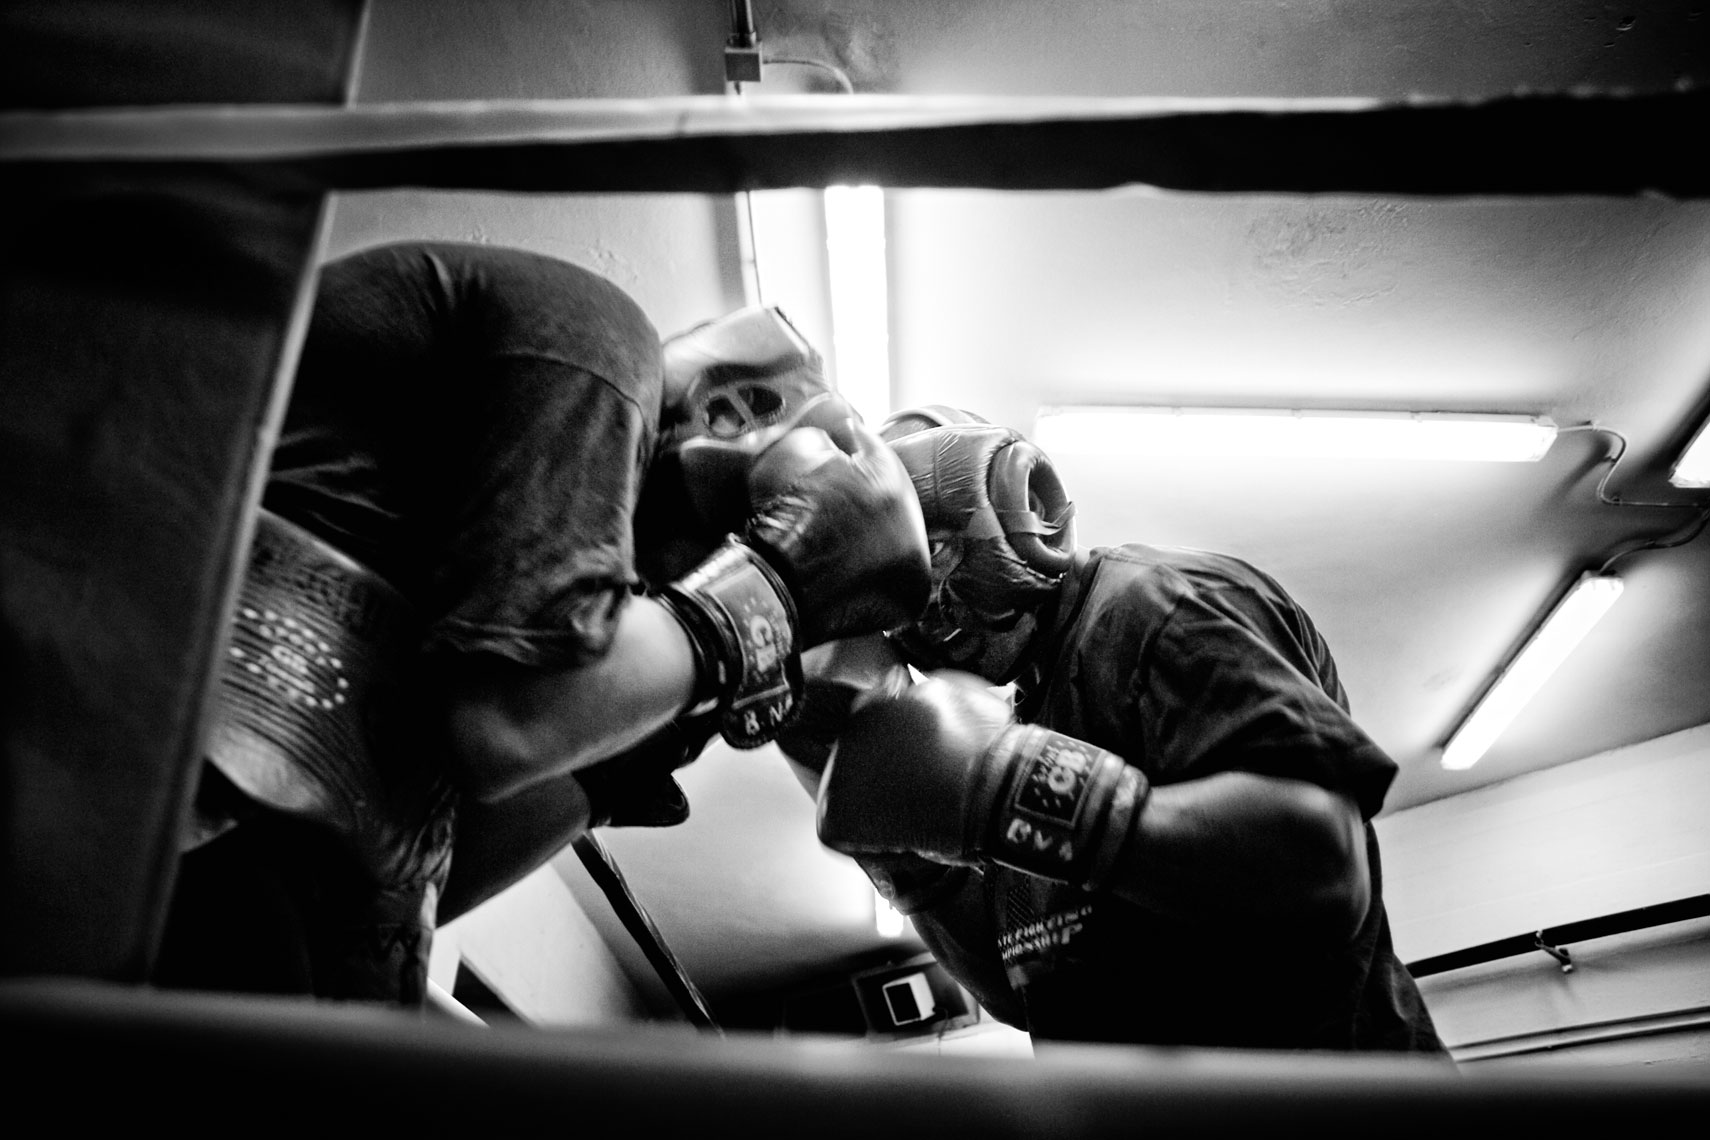 ITALY. Florence, 6th October 2011. Leonard Bundu fighting against a sparring partner in preparation of the match for the EBU (European Boxing Union) Welter Weight crown.